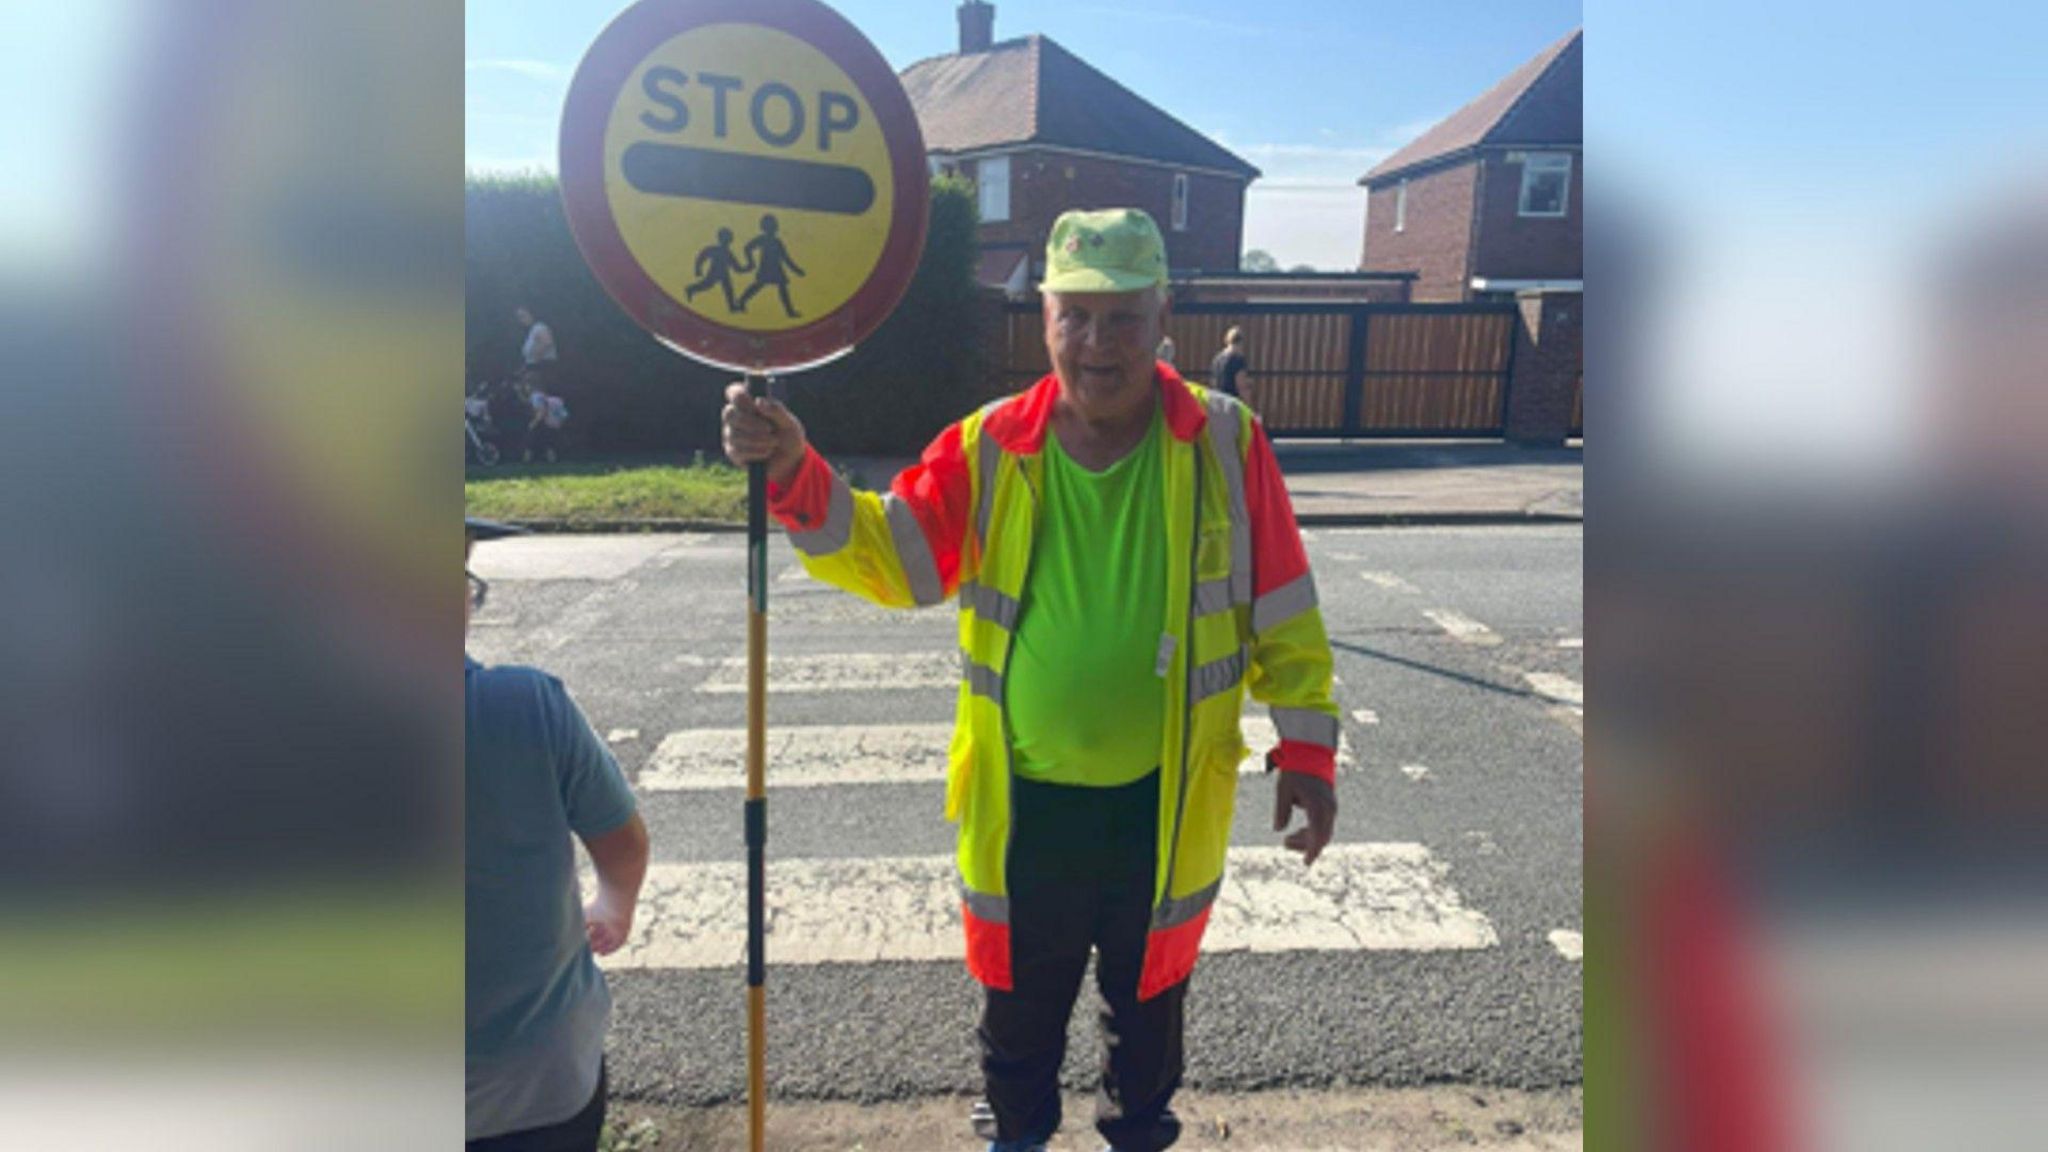 Brian Andrews patrolling the crossing at Anlaby Primary School